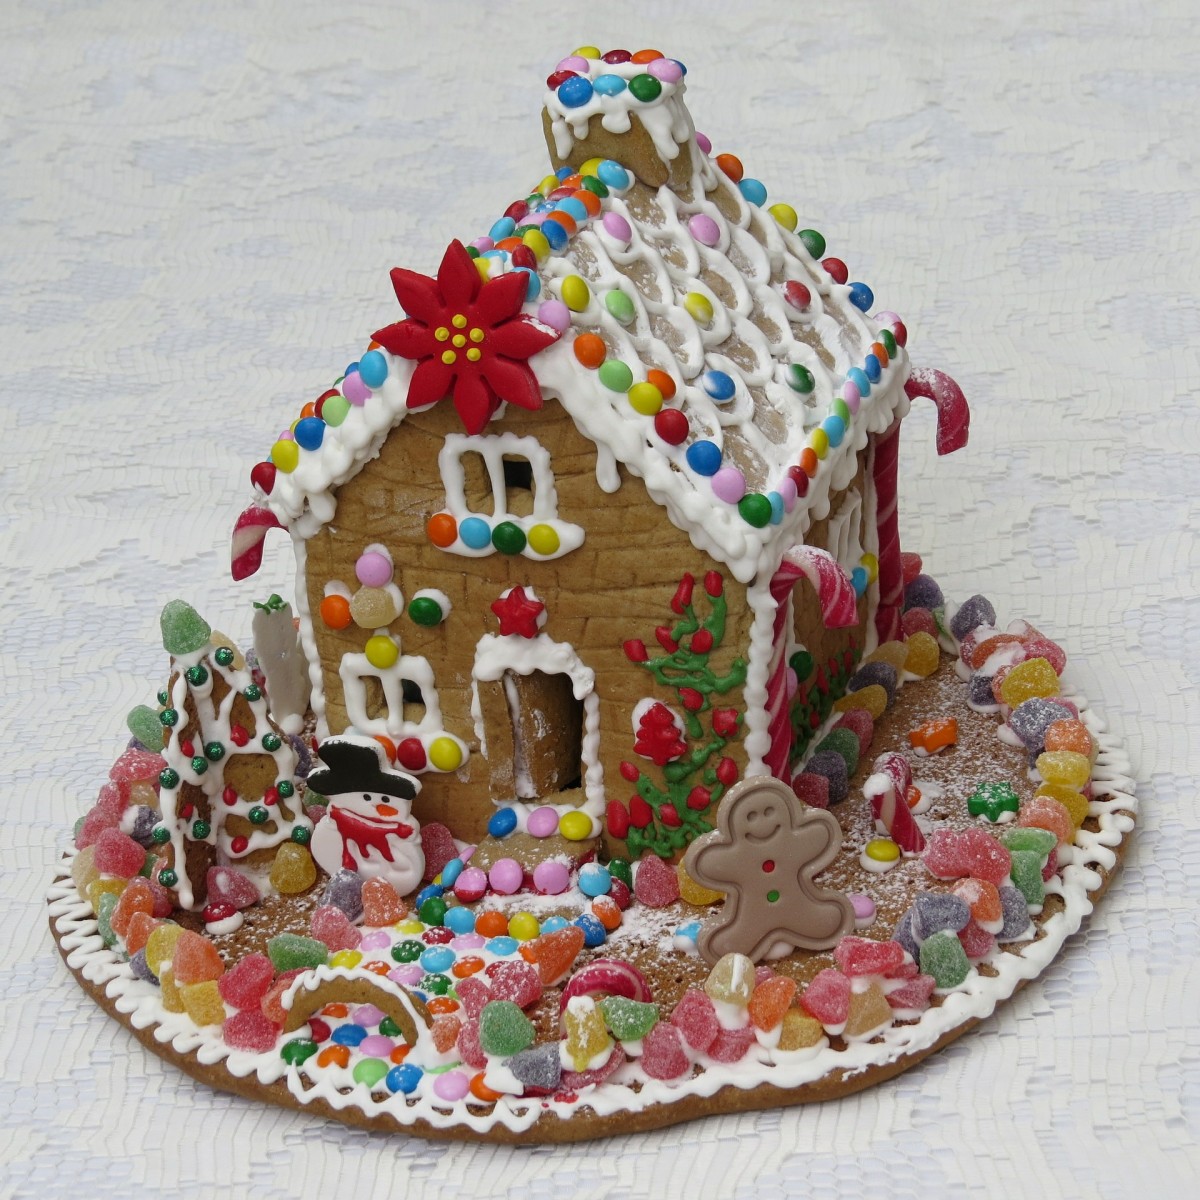 gingerbread-house-101-how-to-build-a-house-that-wont-collapse-and-tastes-great